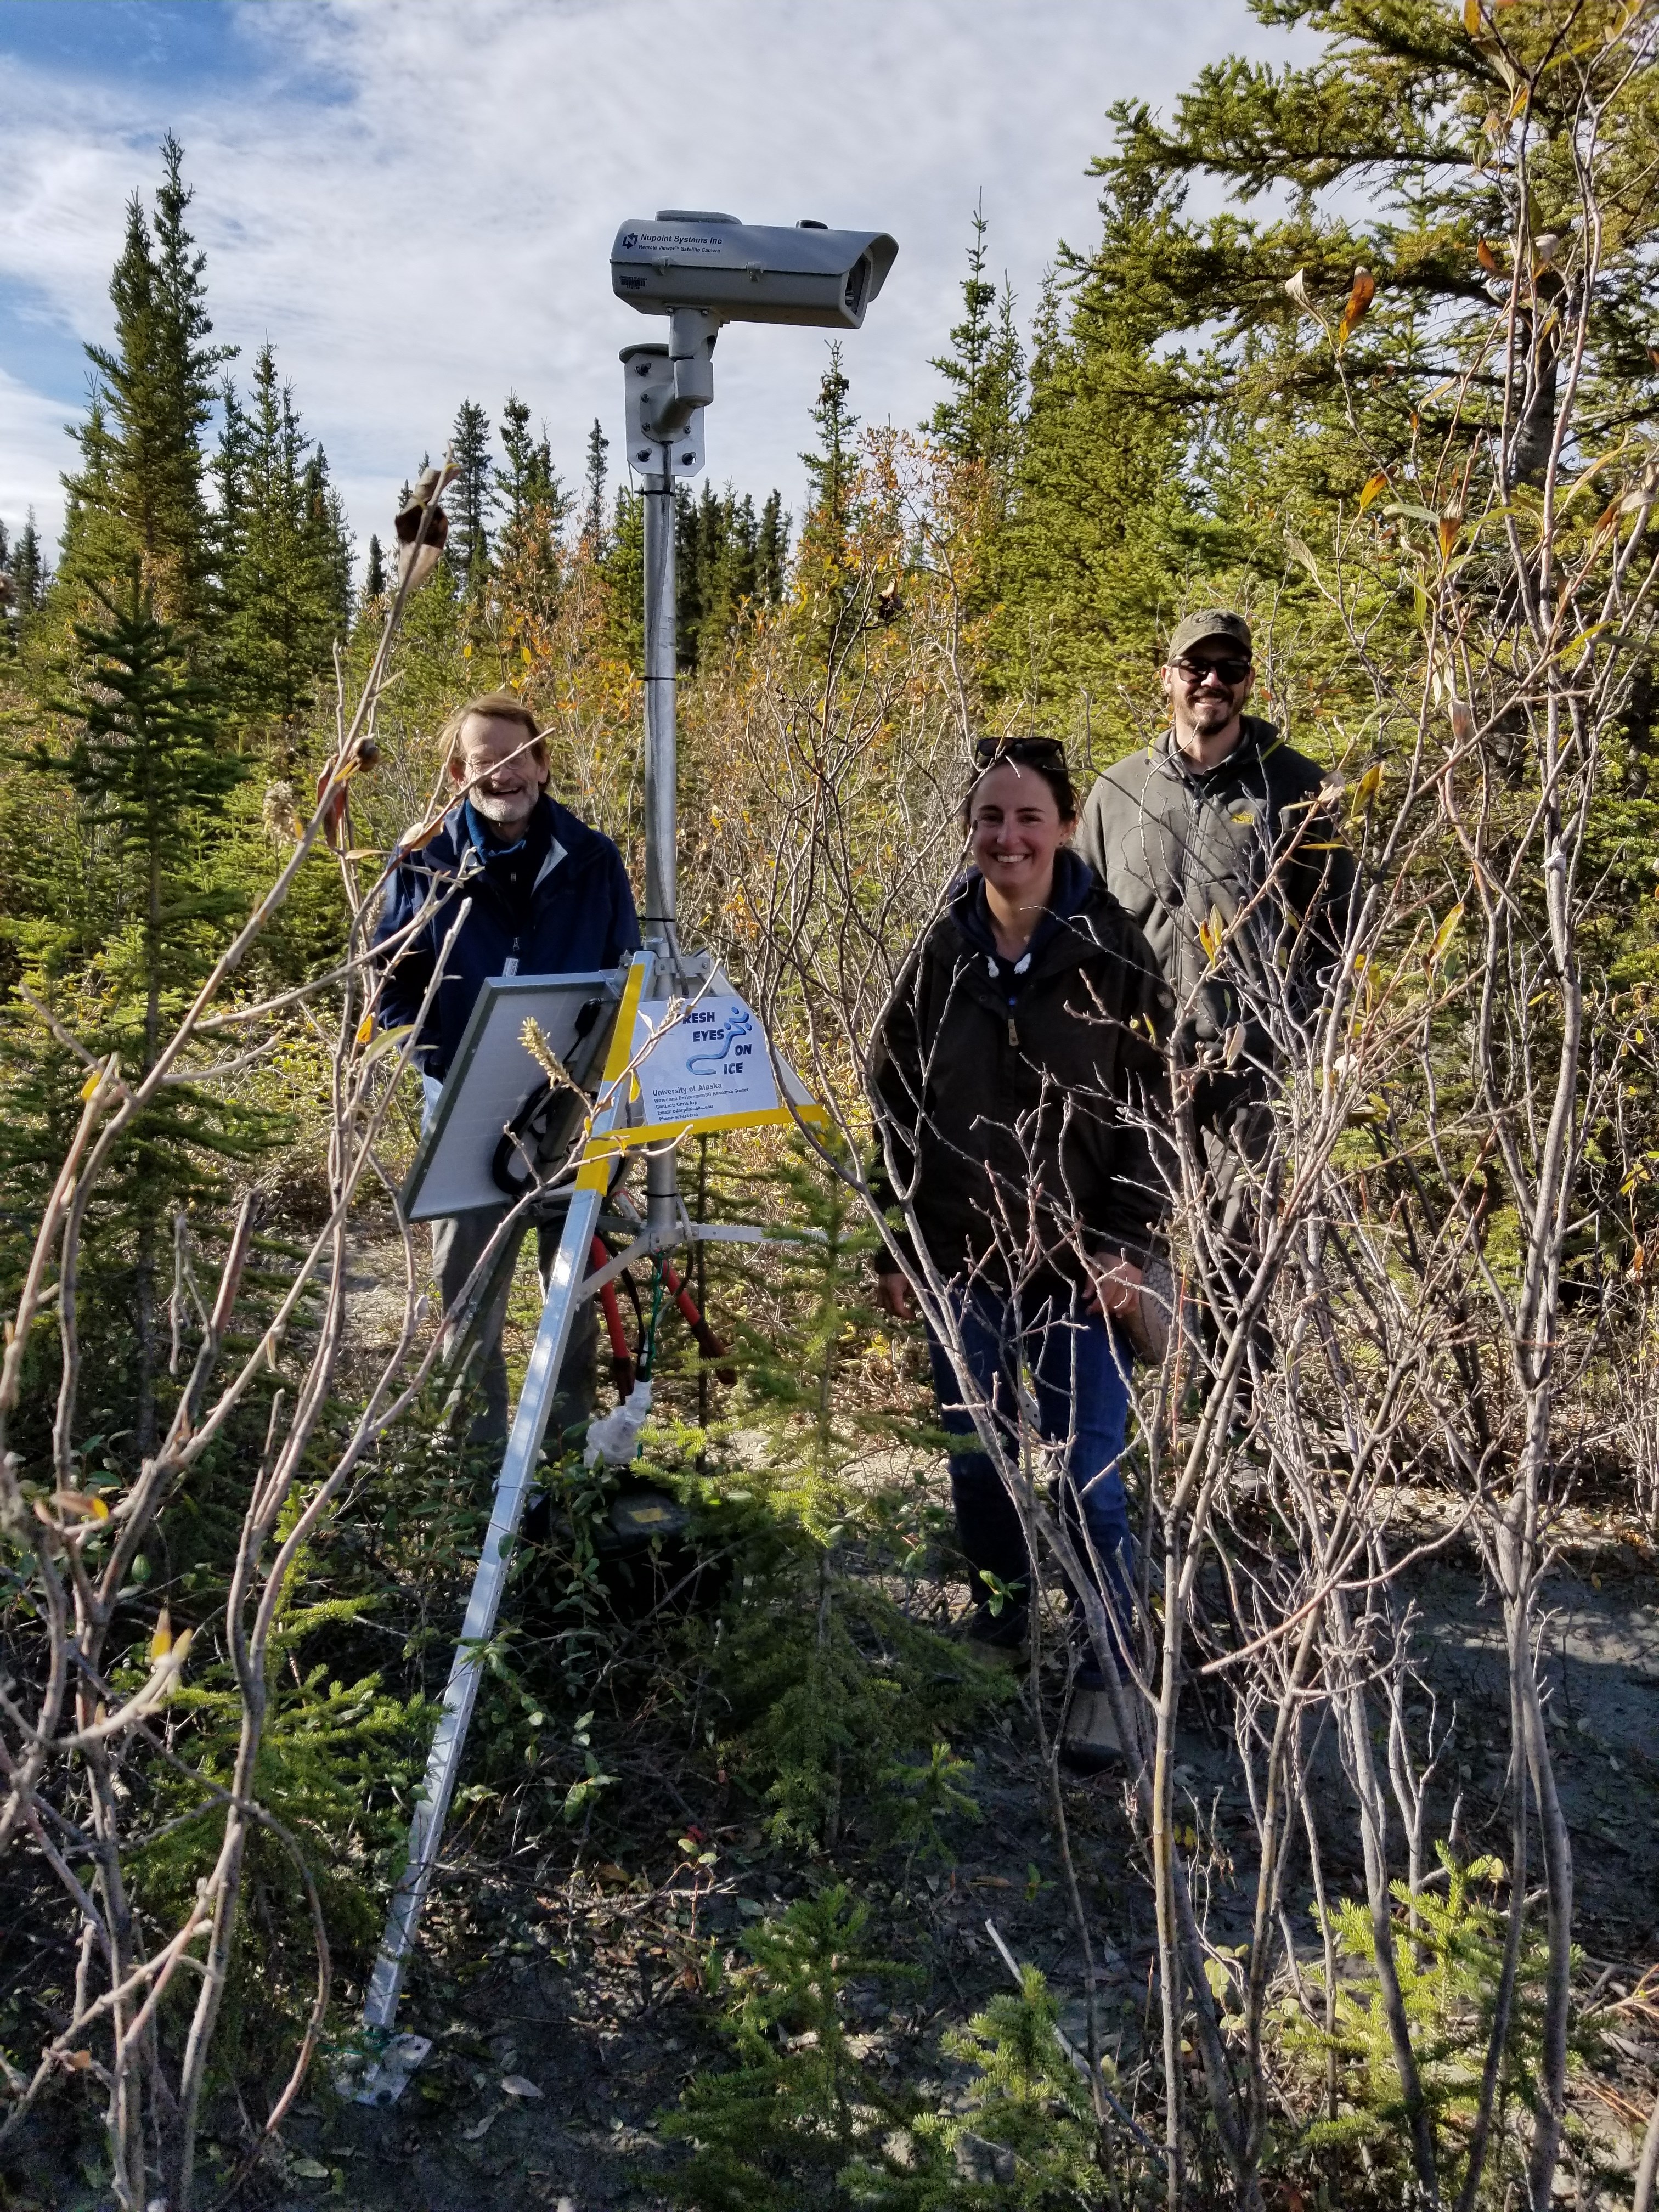 Allen Bondurant setting up a new ice observation camera on the Copper River with the help of Wrangell St. Elias NP scientists Caroline Ketron and Paul Atkinson